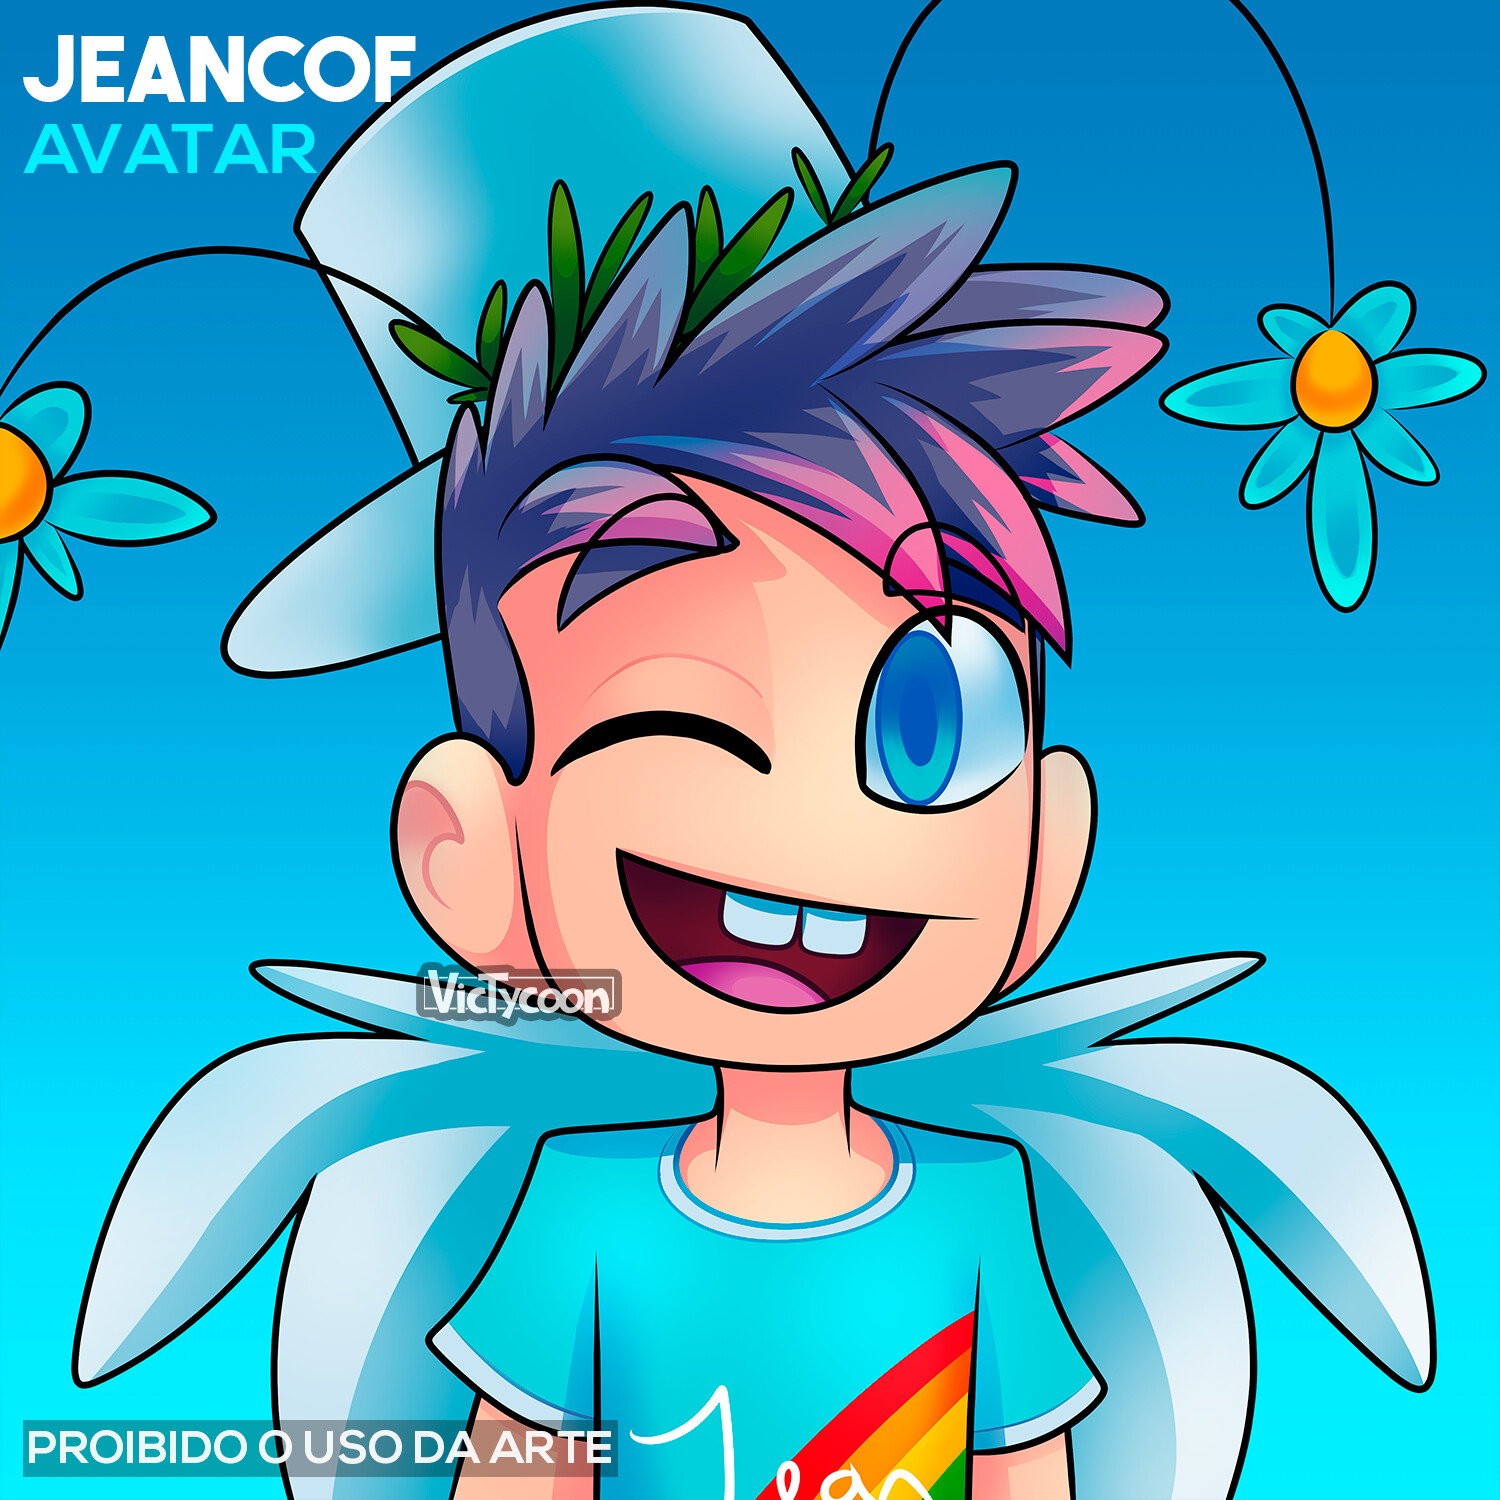 AVATAR - Lokis (Canal  Infantil Roblox) by VicTycoon on